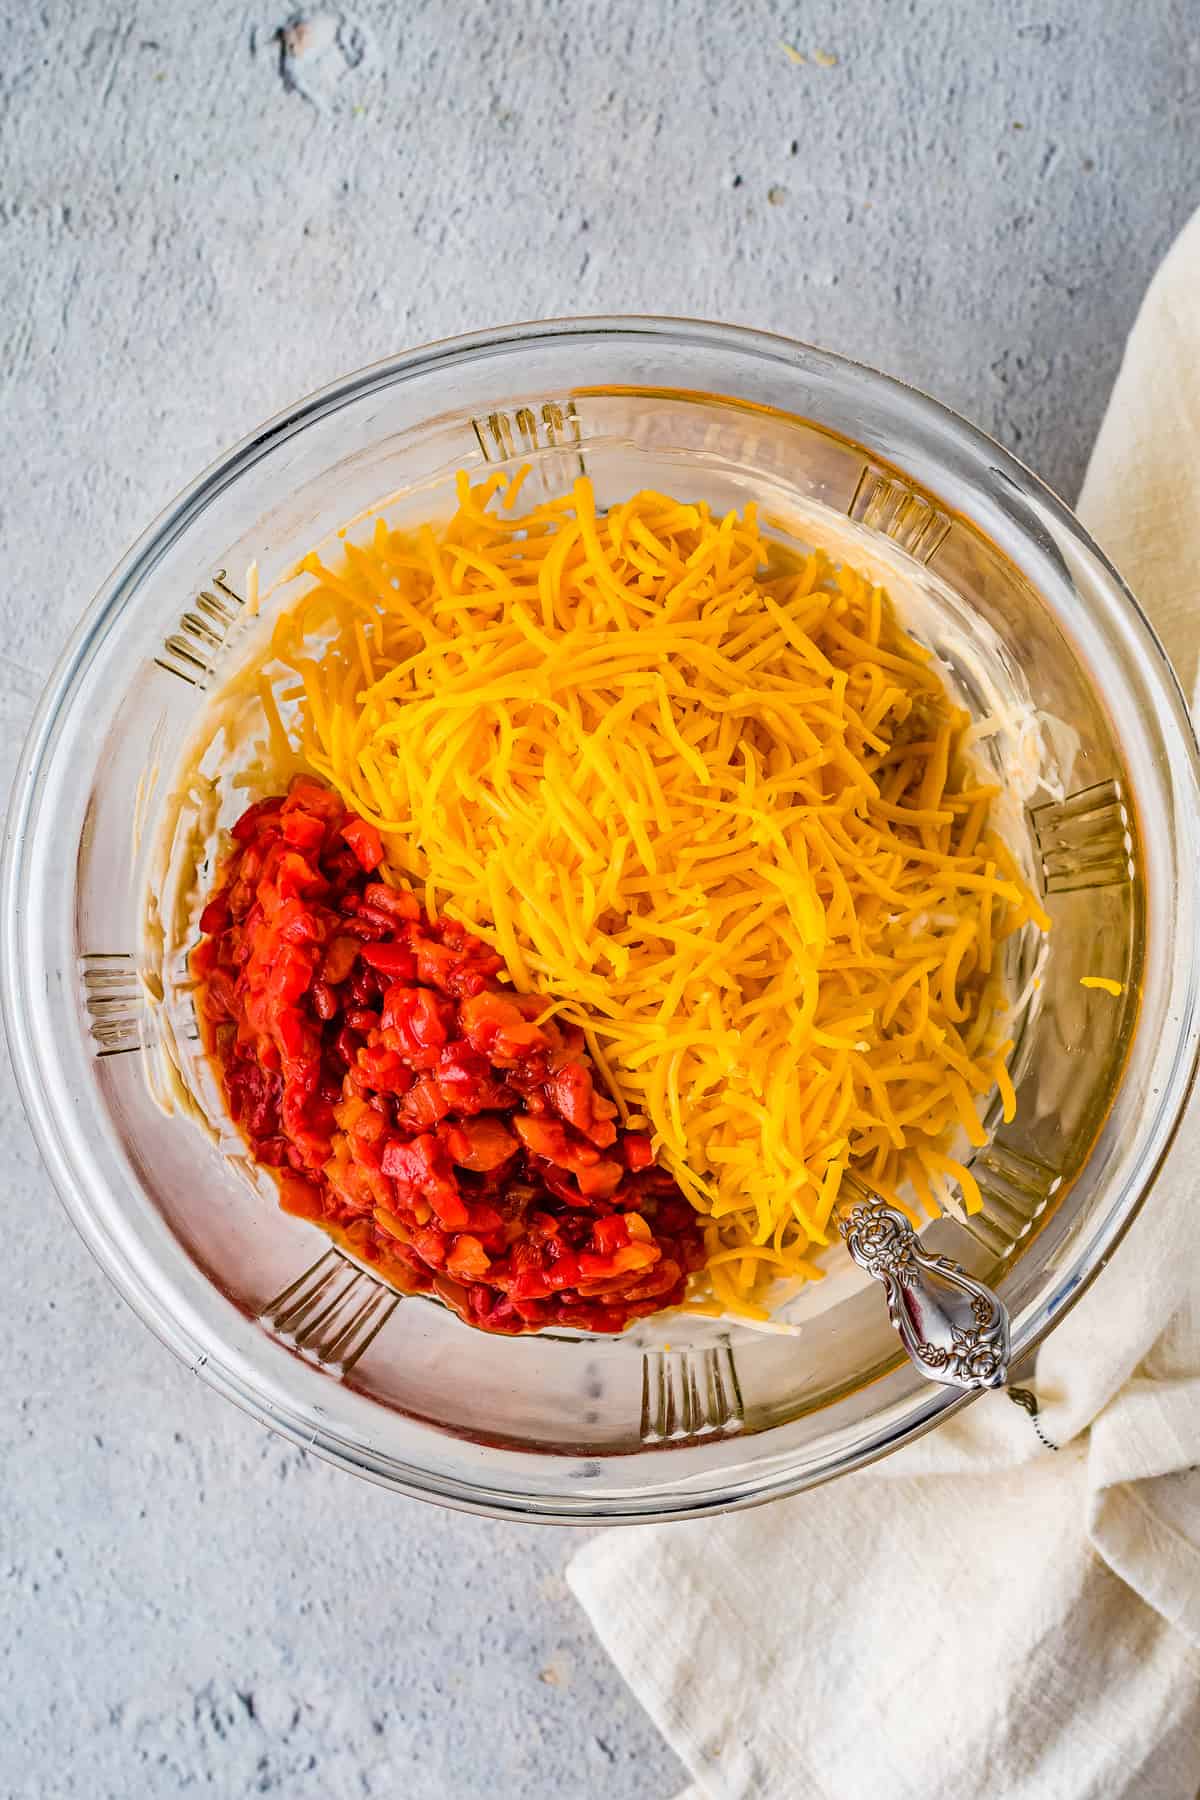 Overhead image of cheese and pimentos in glass bowl